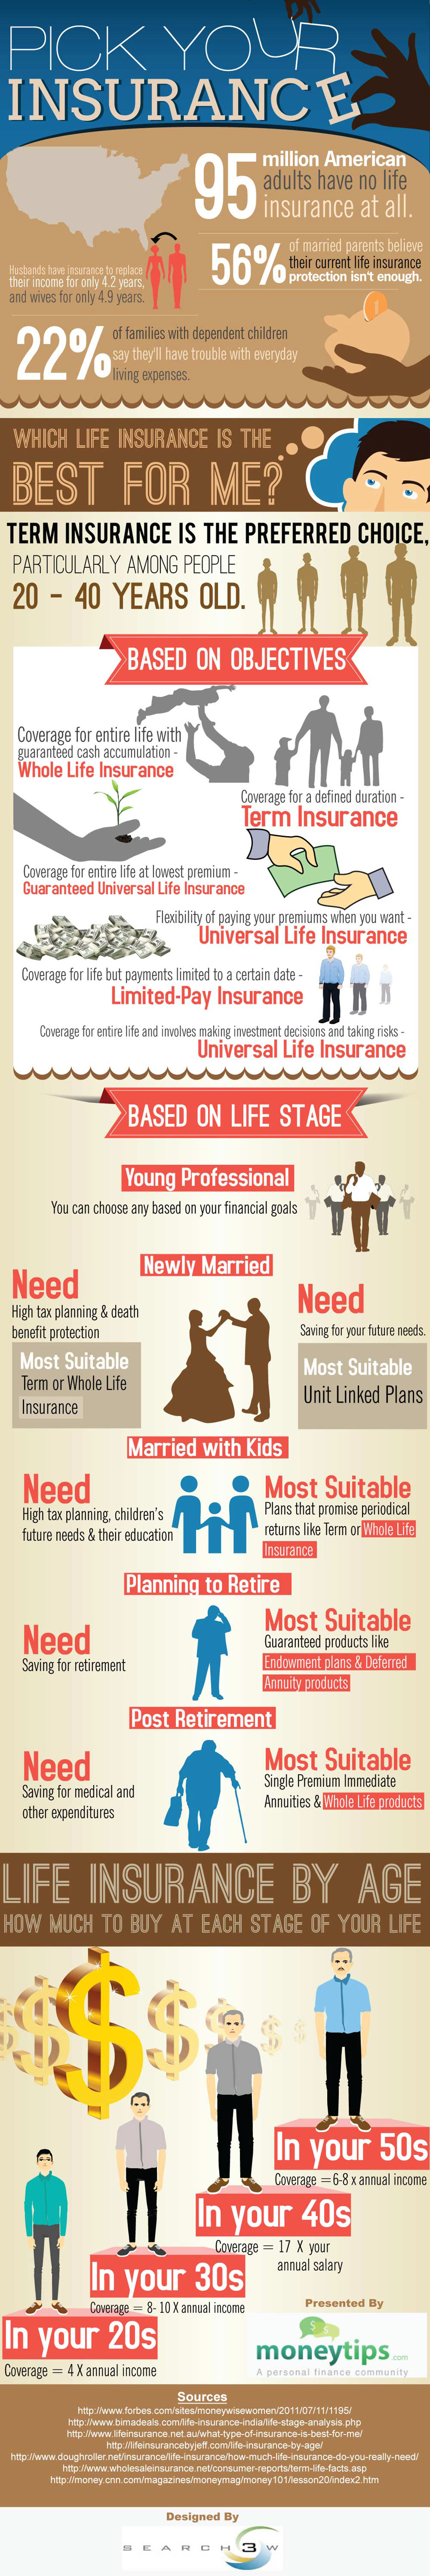 Which Life Insurance is the Best for Me Infographic